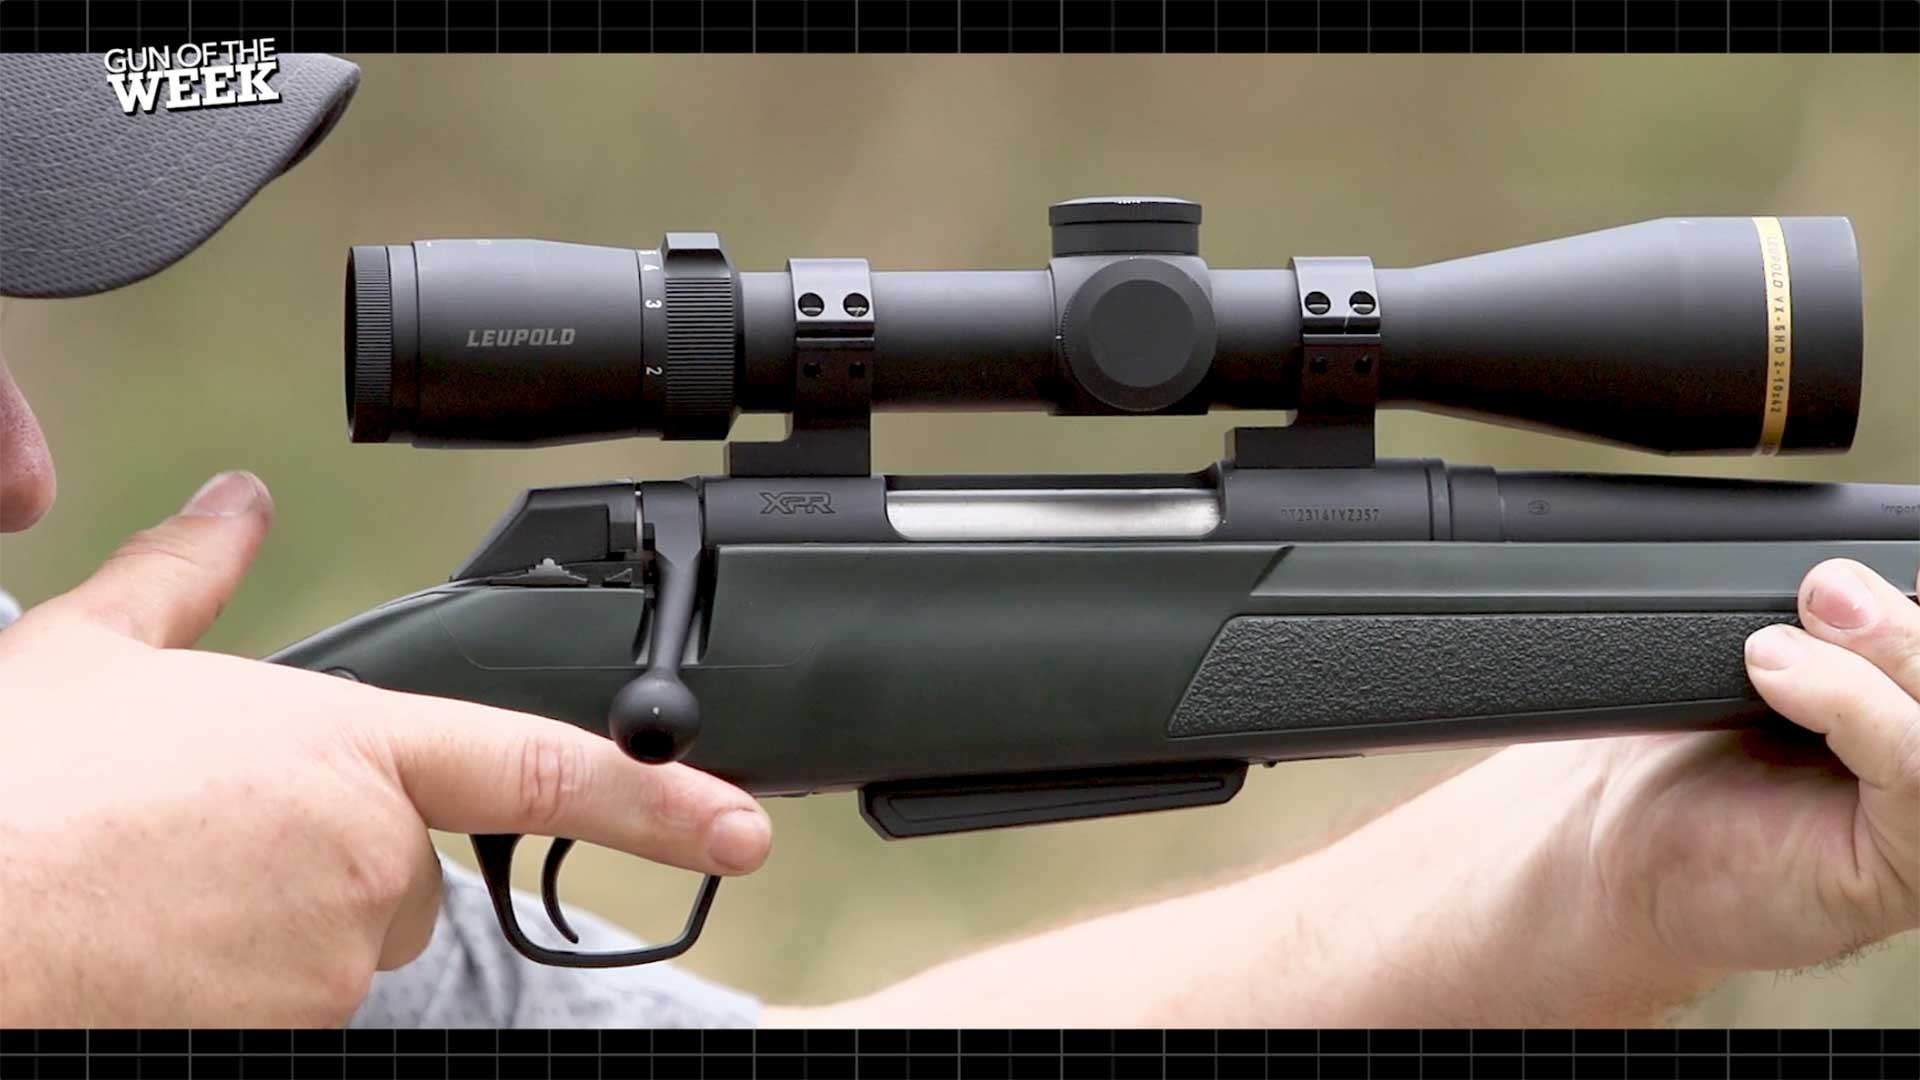 A man aiming the WInchester XPR Stealth SR downrange, with his finger near the trigger.